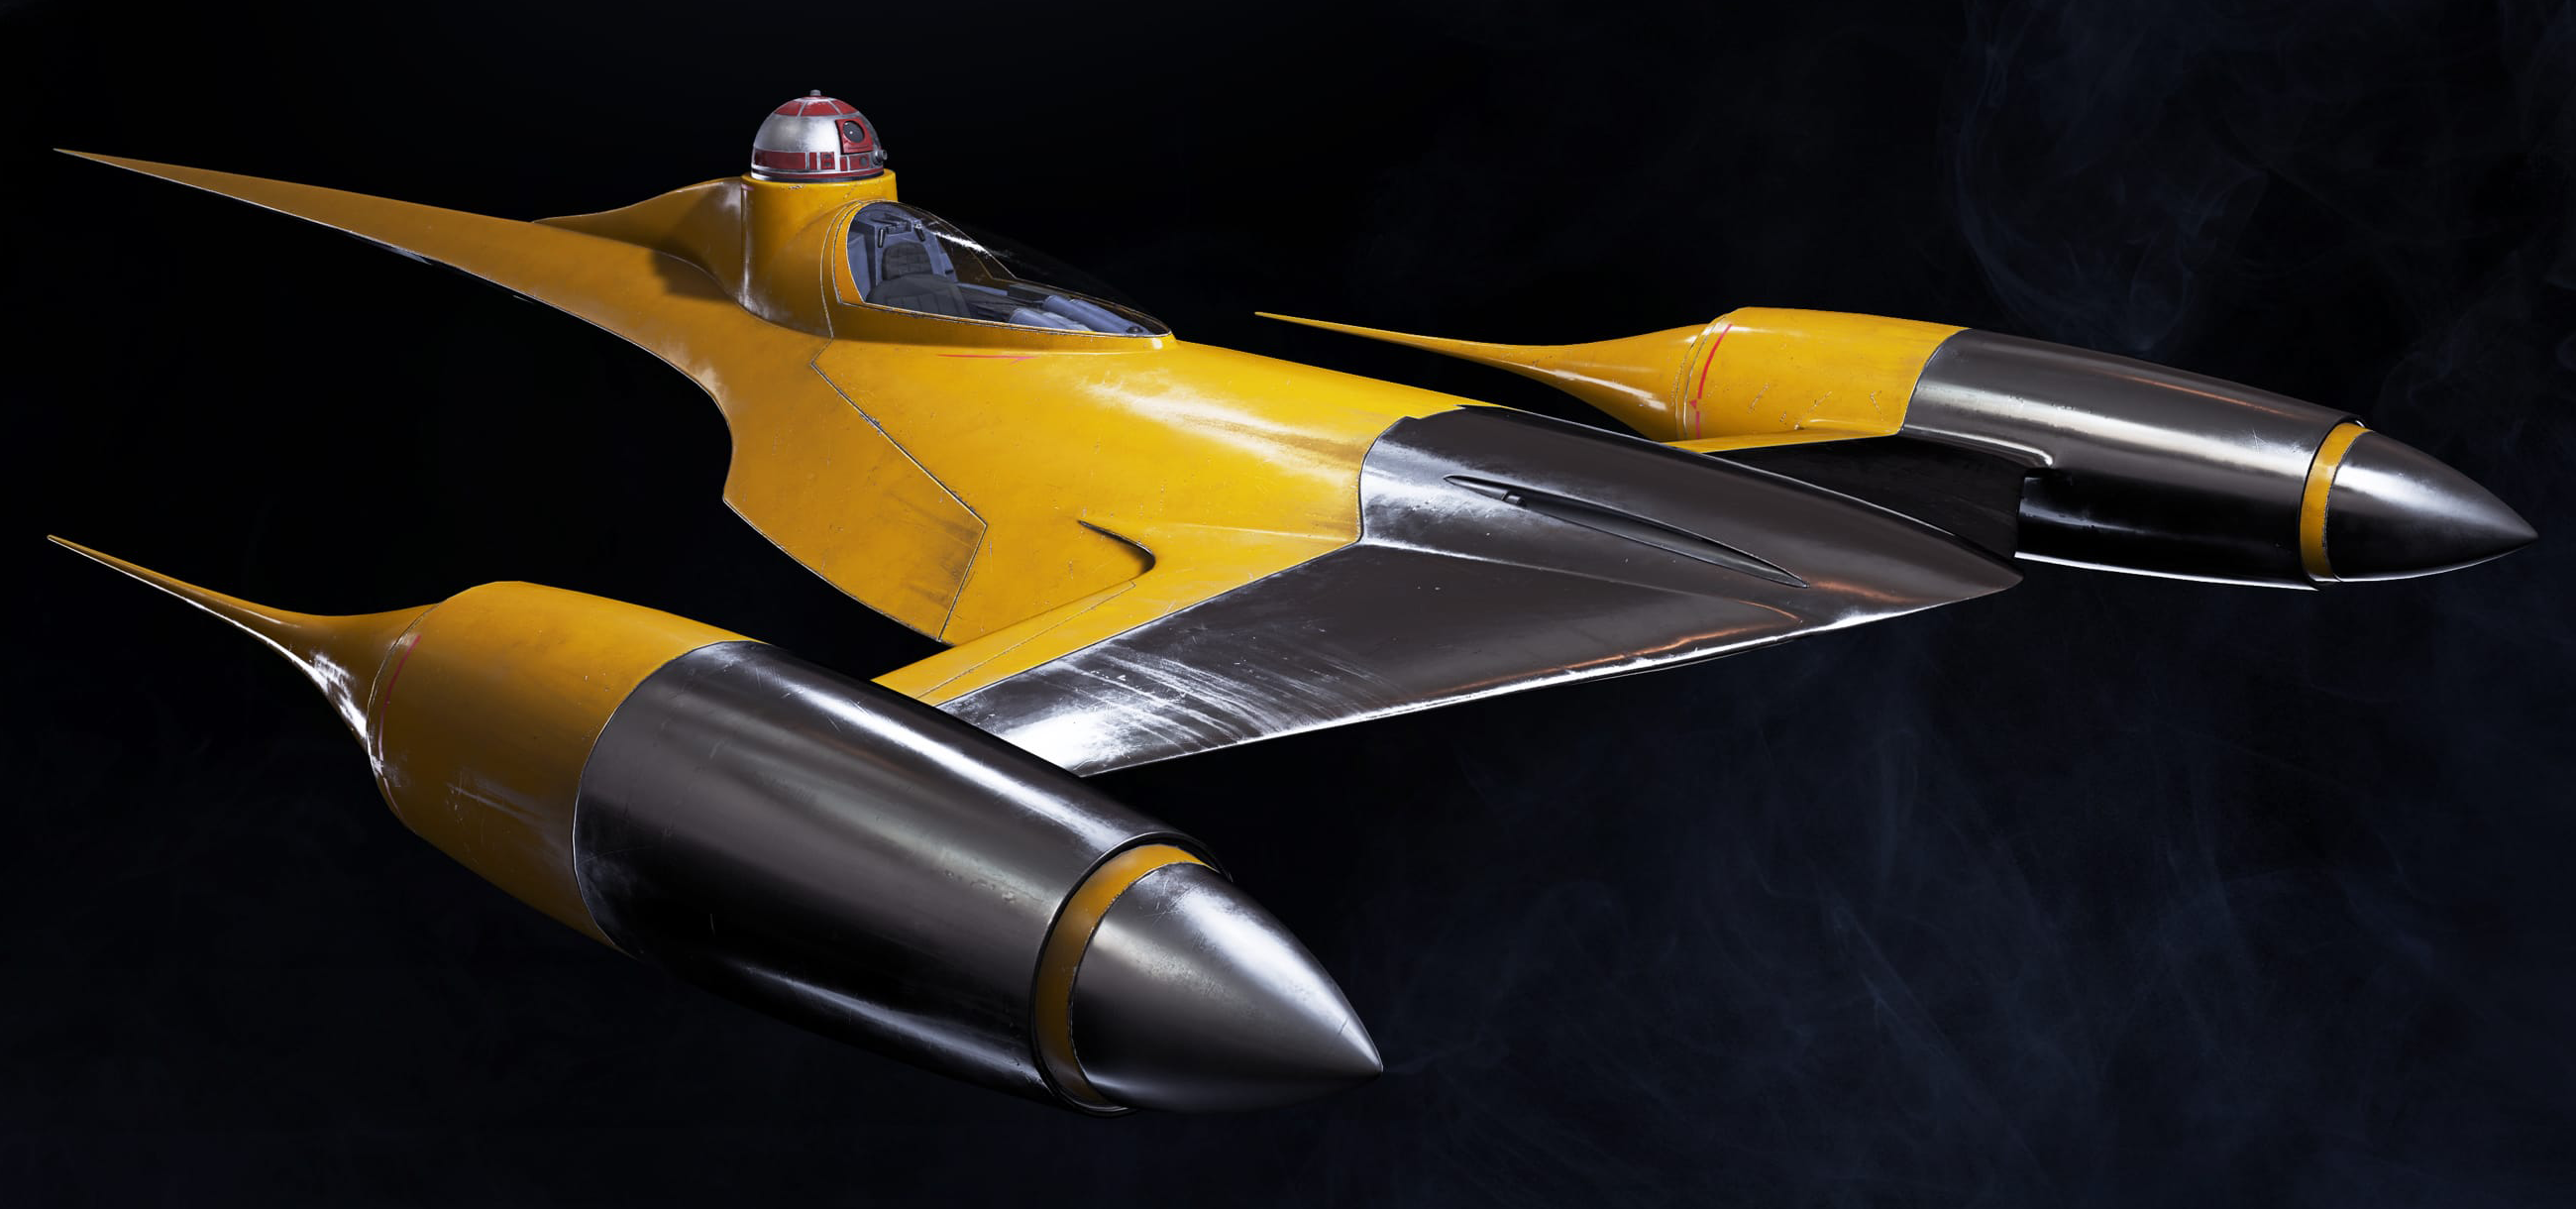 What type of Starfighter is this?